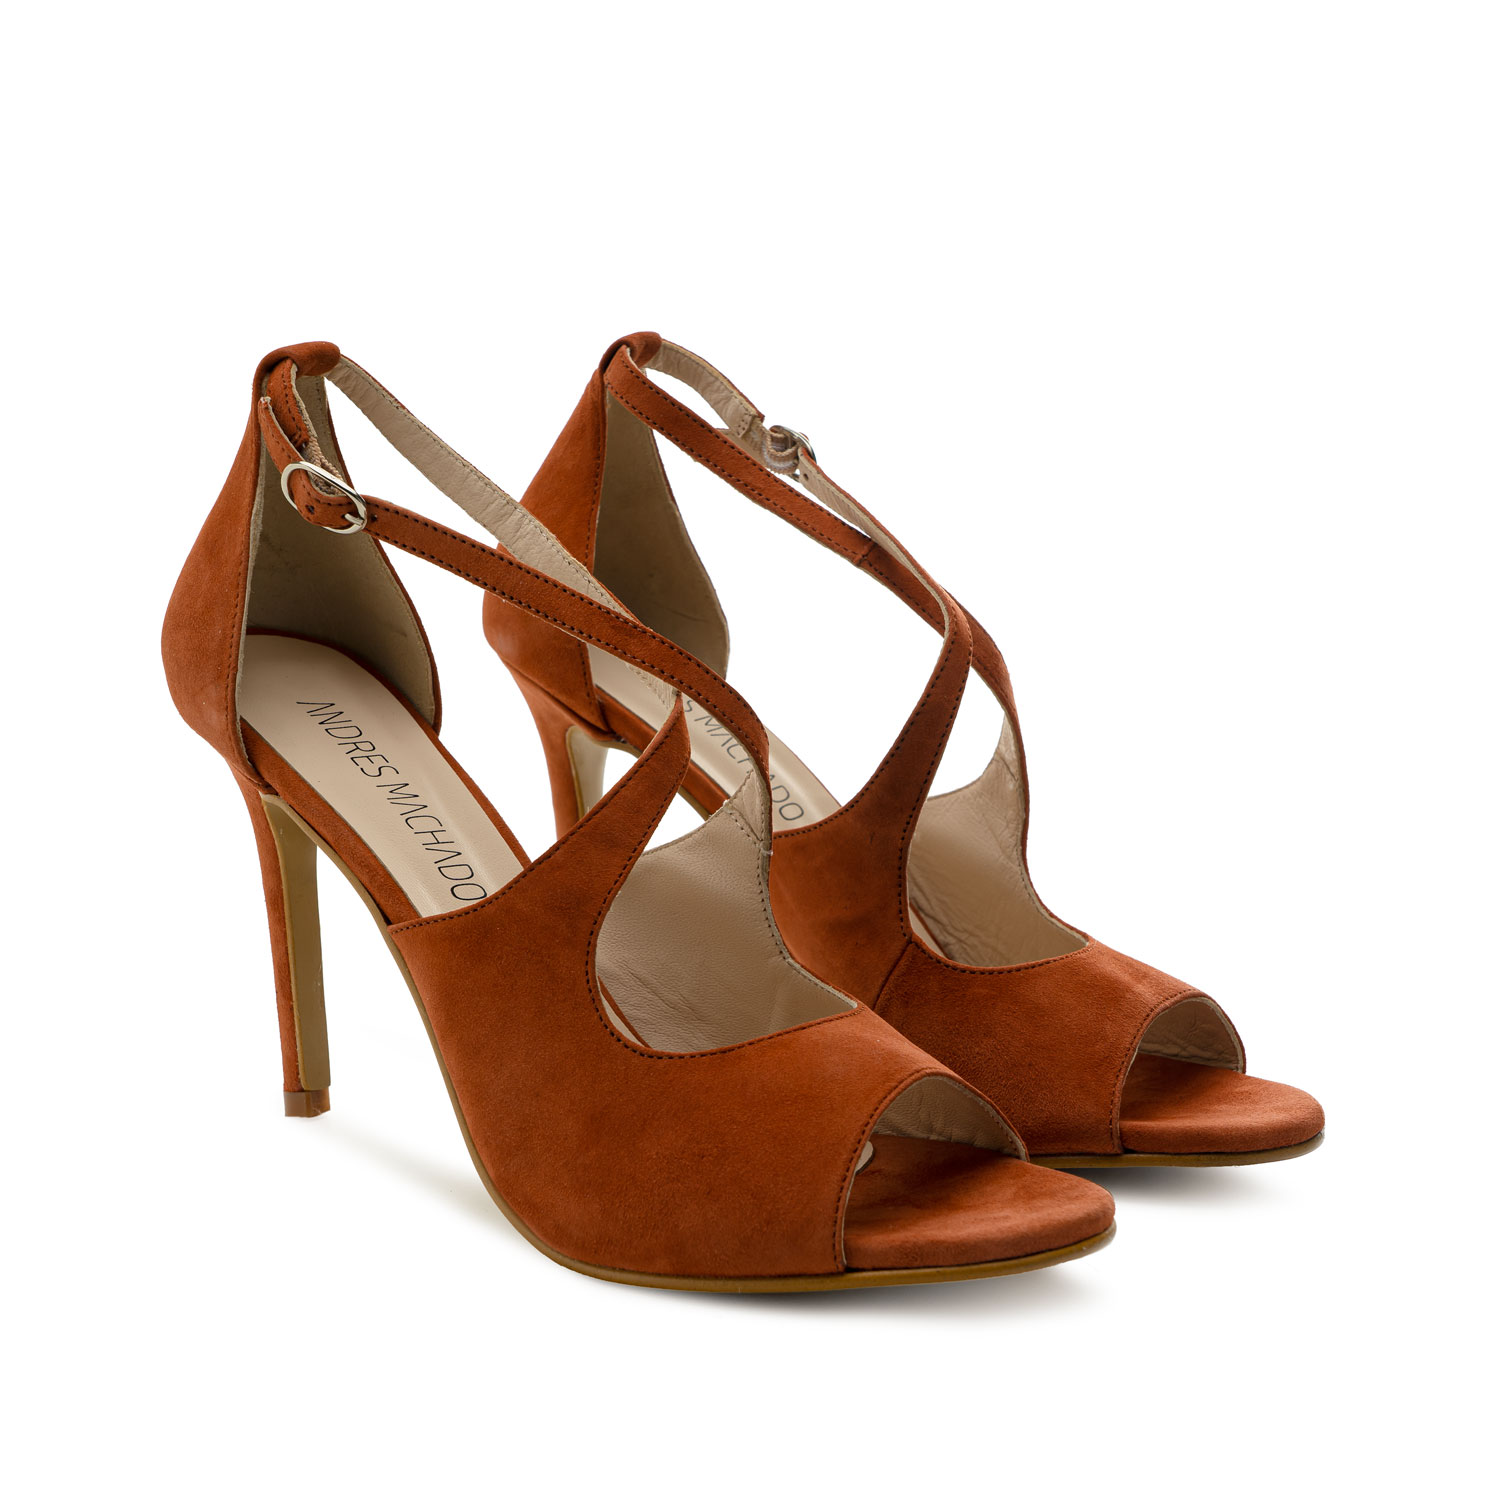 Stiletto Crossed Sandals in Brown Suede Leather 